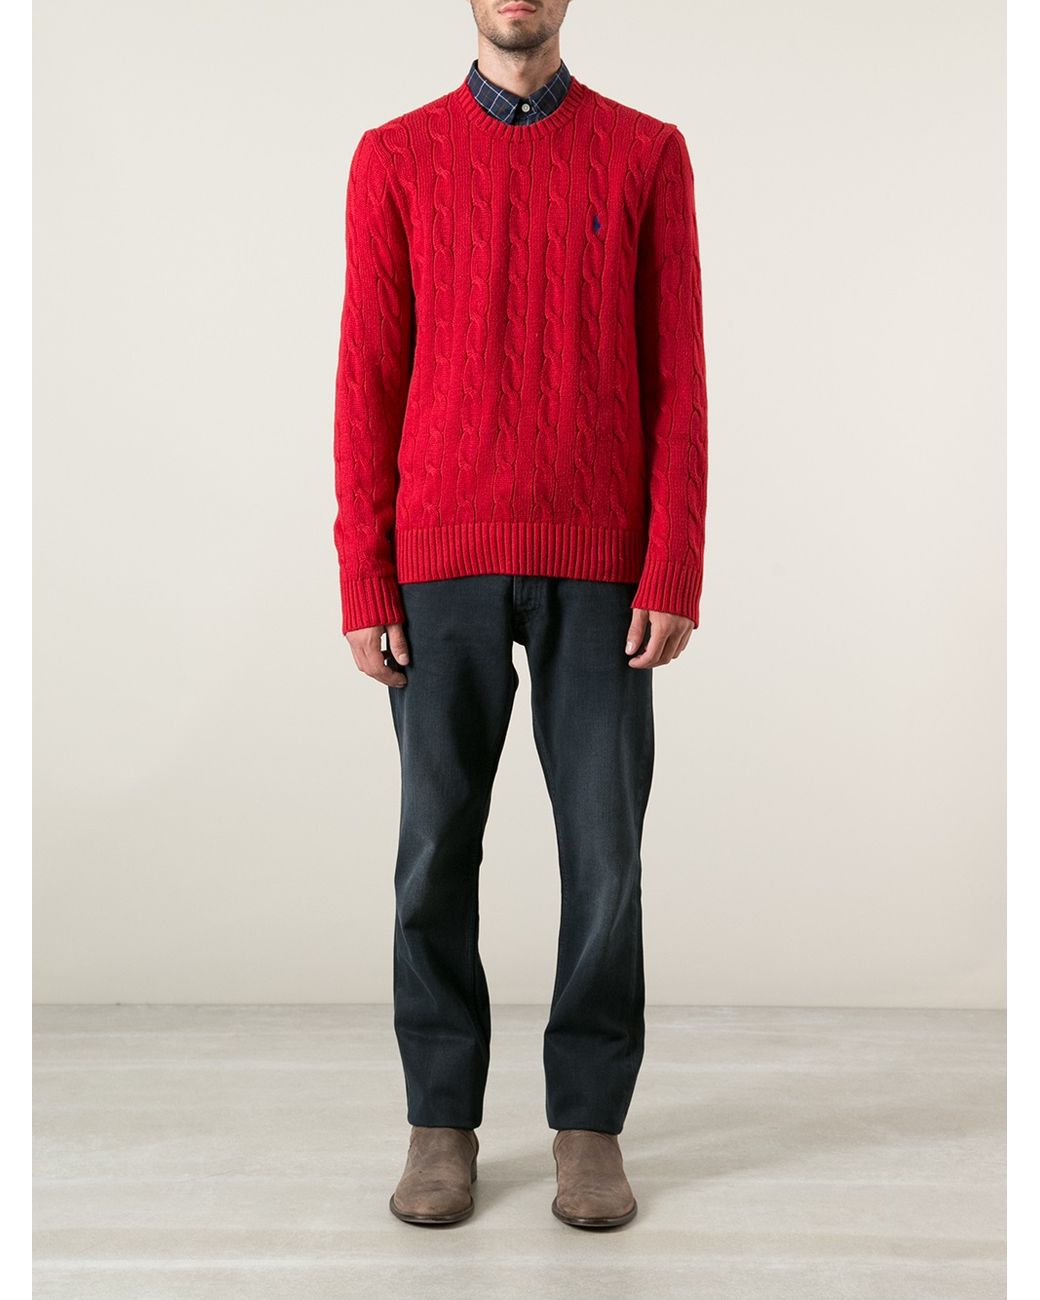 Polo Ralph Lauren Cable Knit Sweater in Red for Men | Lyst